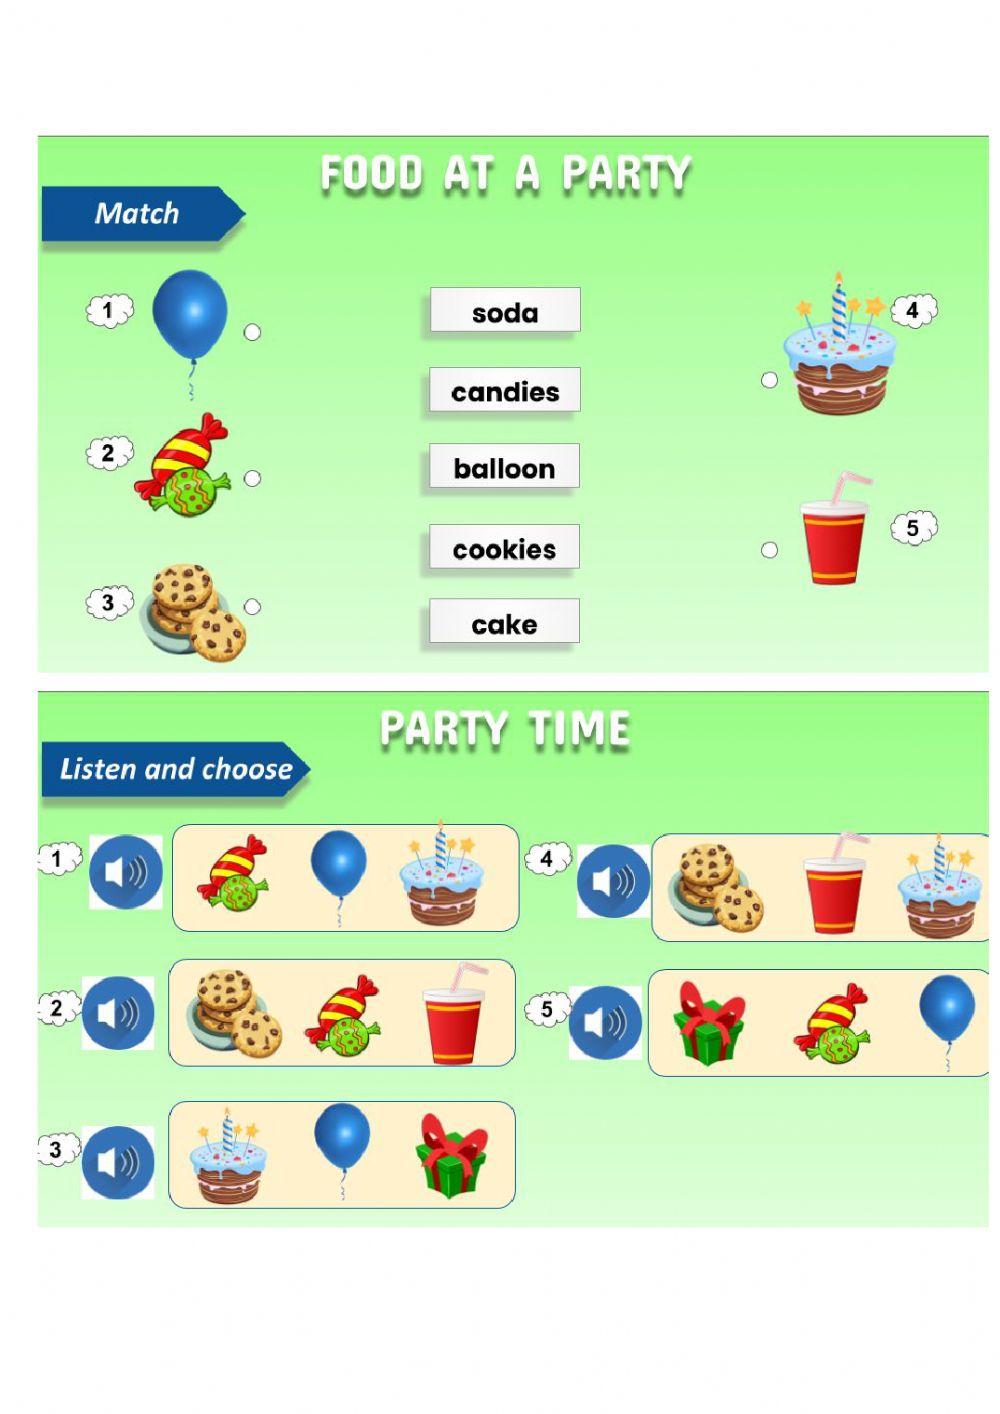 Food at a party- vocabulary